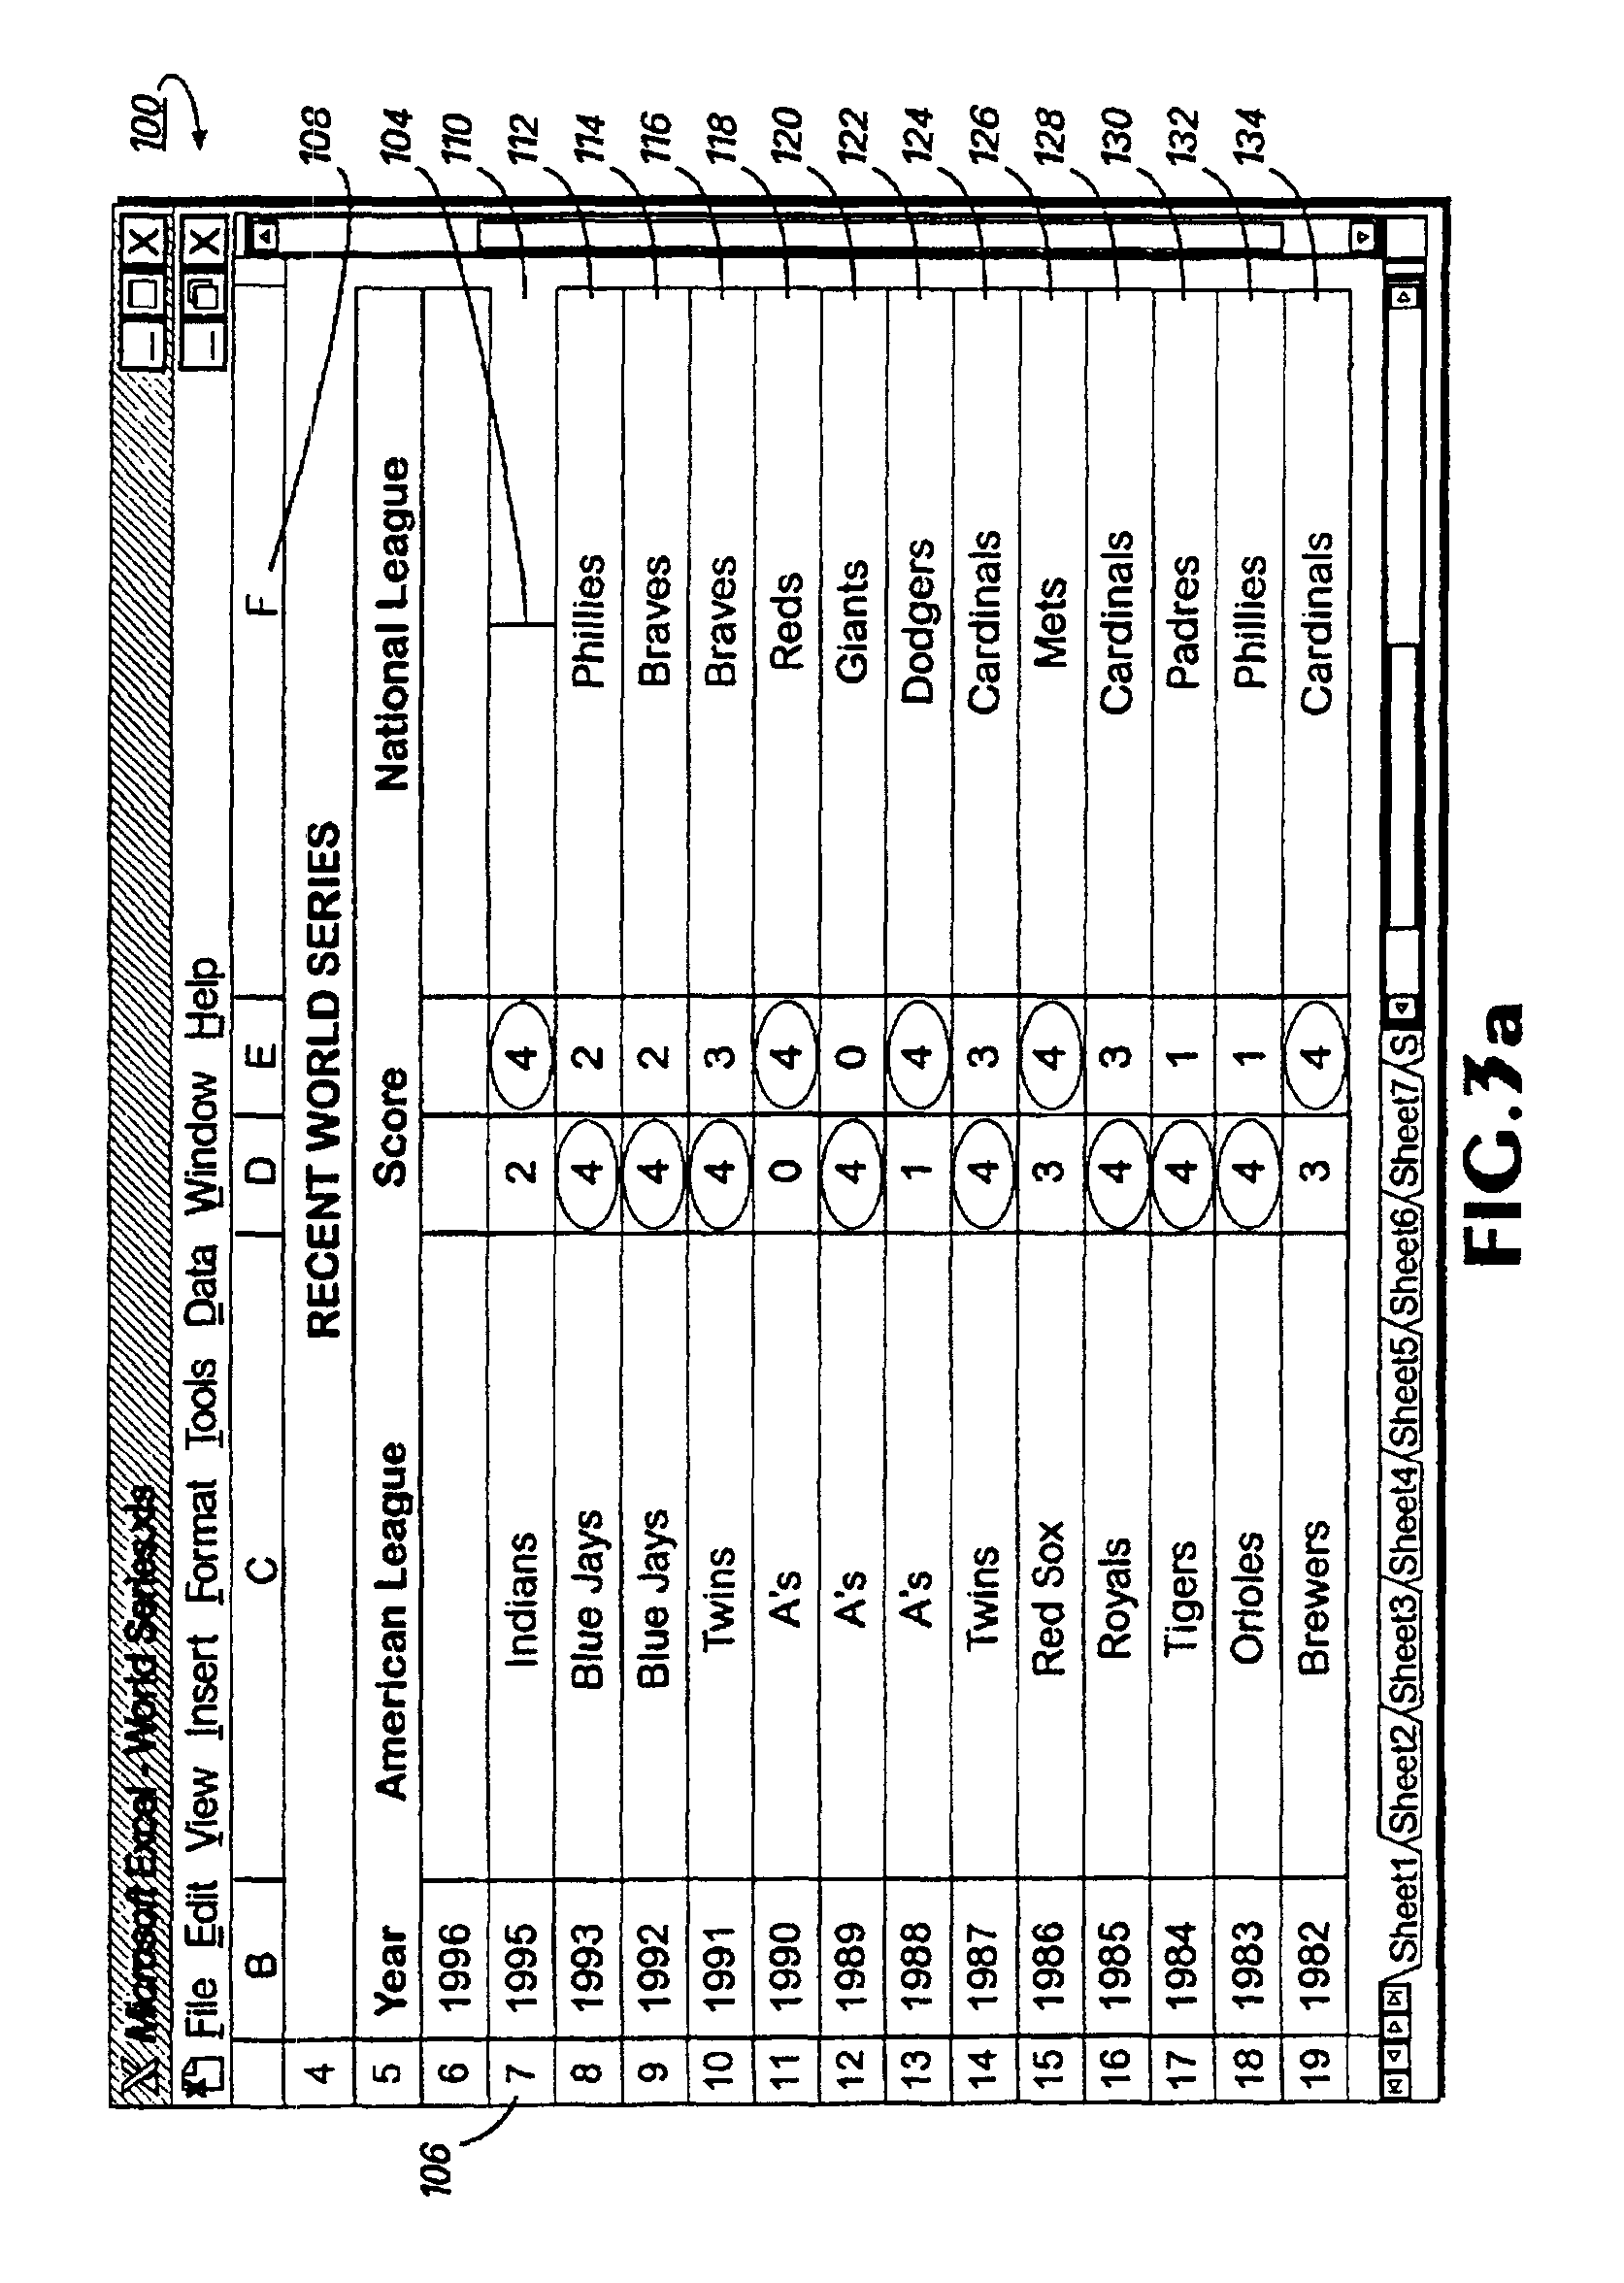 Method and apparatus for suggesting completions for a partially entered data item based on previously-entered, associated data items